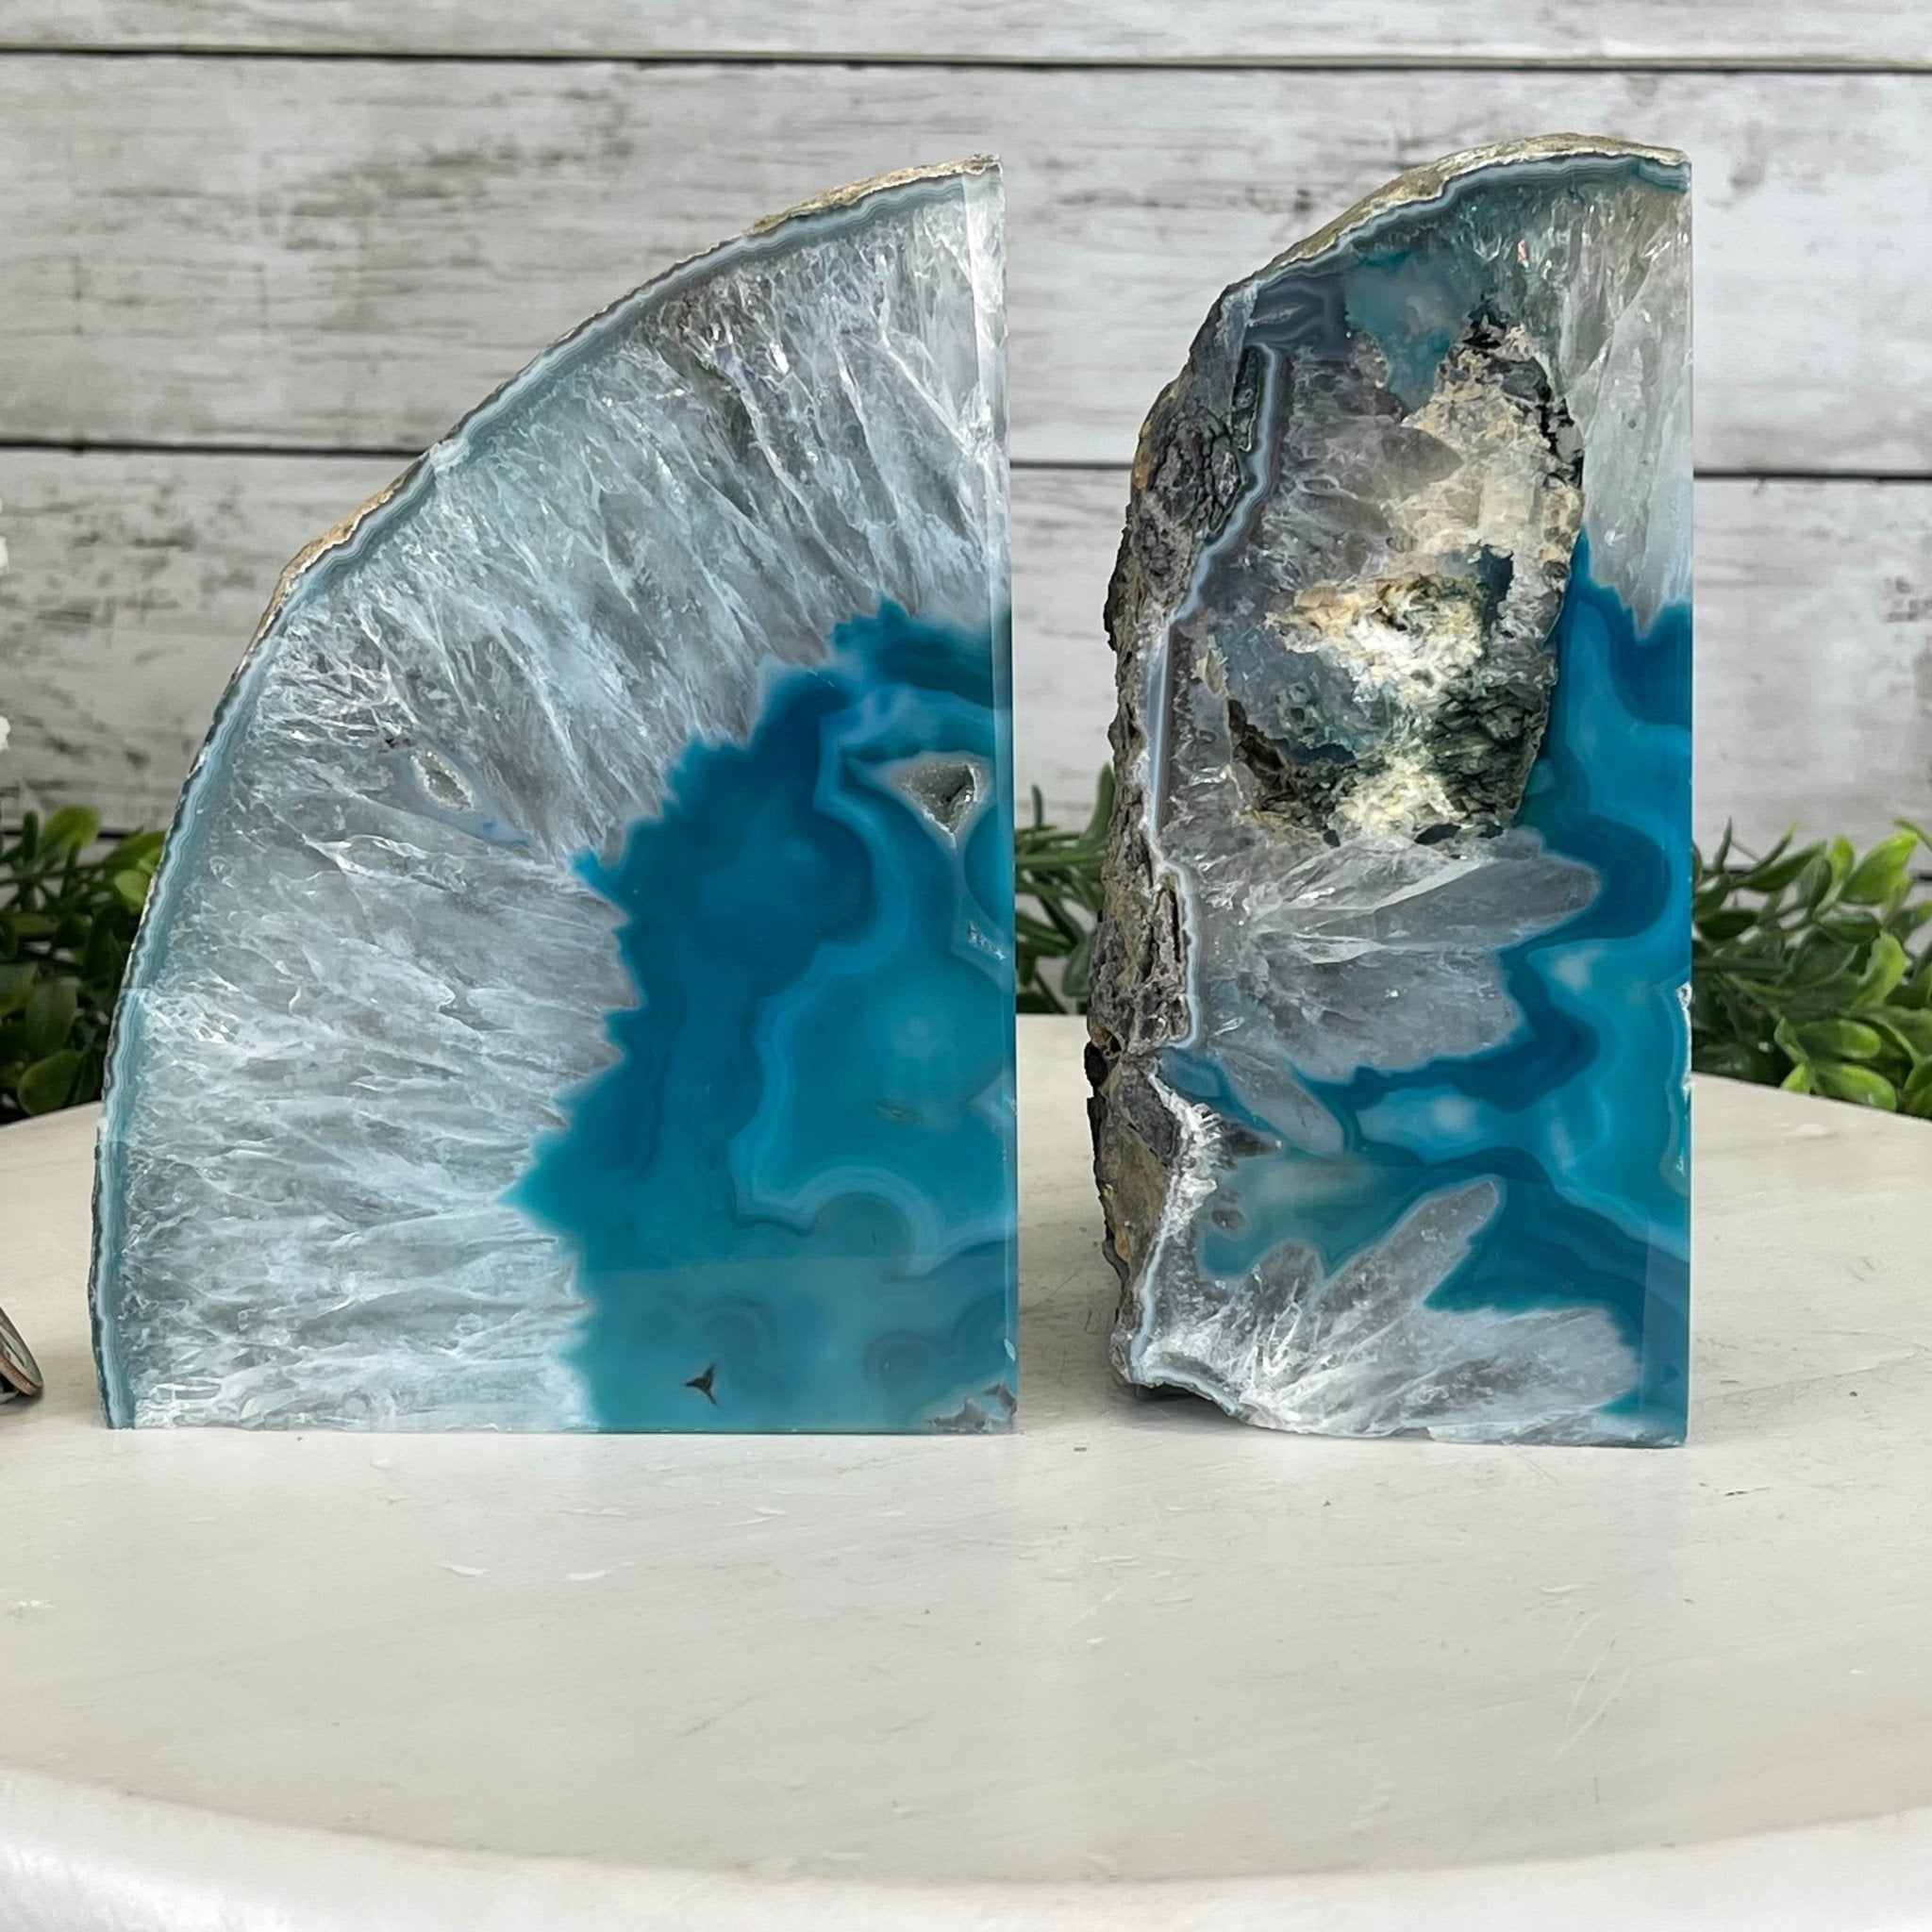 Teal Dyed Brazilian Agate Stone Bookends, 9.3 lbs & 5.75" tall Model #5151TL-020 by Brazil Gems - Brazil GemsBrazil GemsTeal Dyed Brazilian Agate Stone Bookends, 9.3 lbs & 5.75" tall Model #5151TL-020 by Brazil GemsBookends5151TL-020